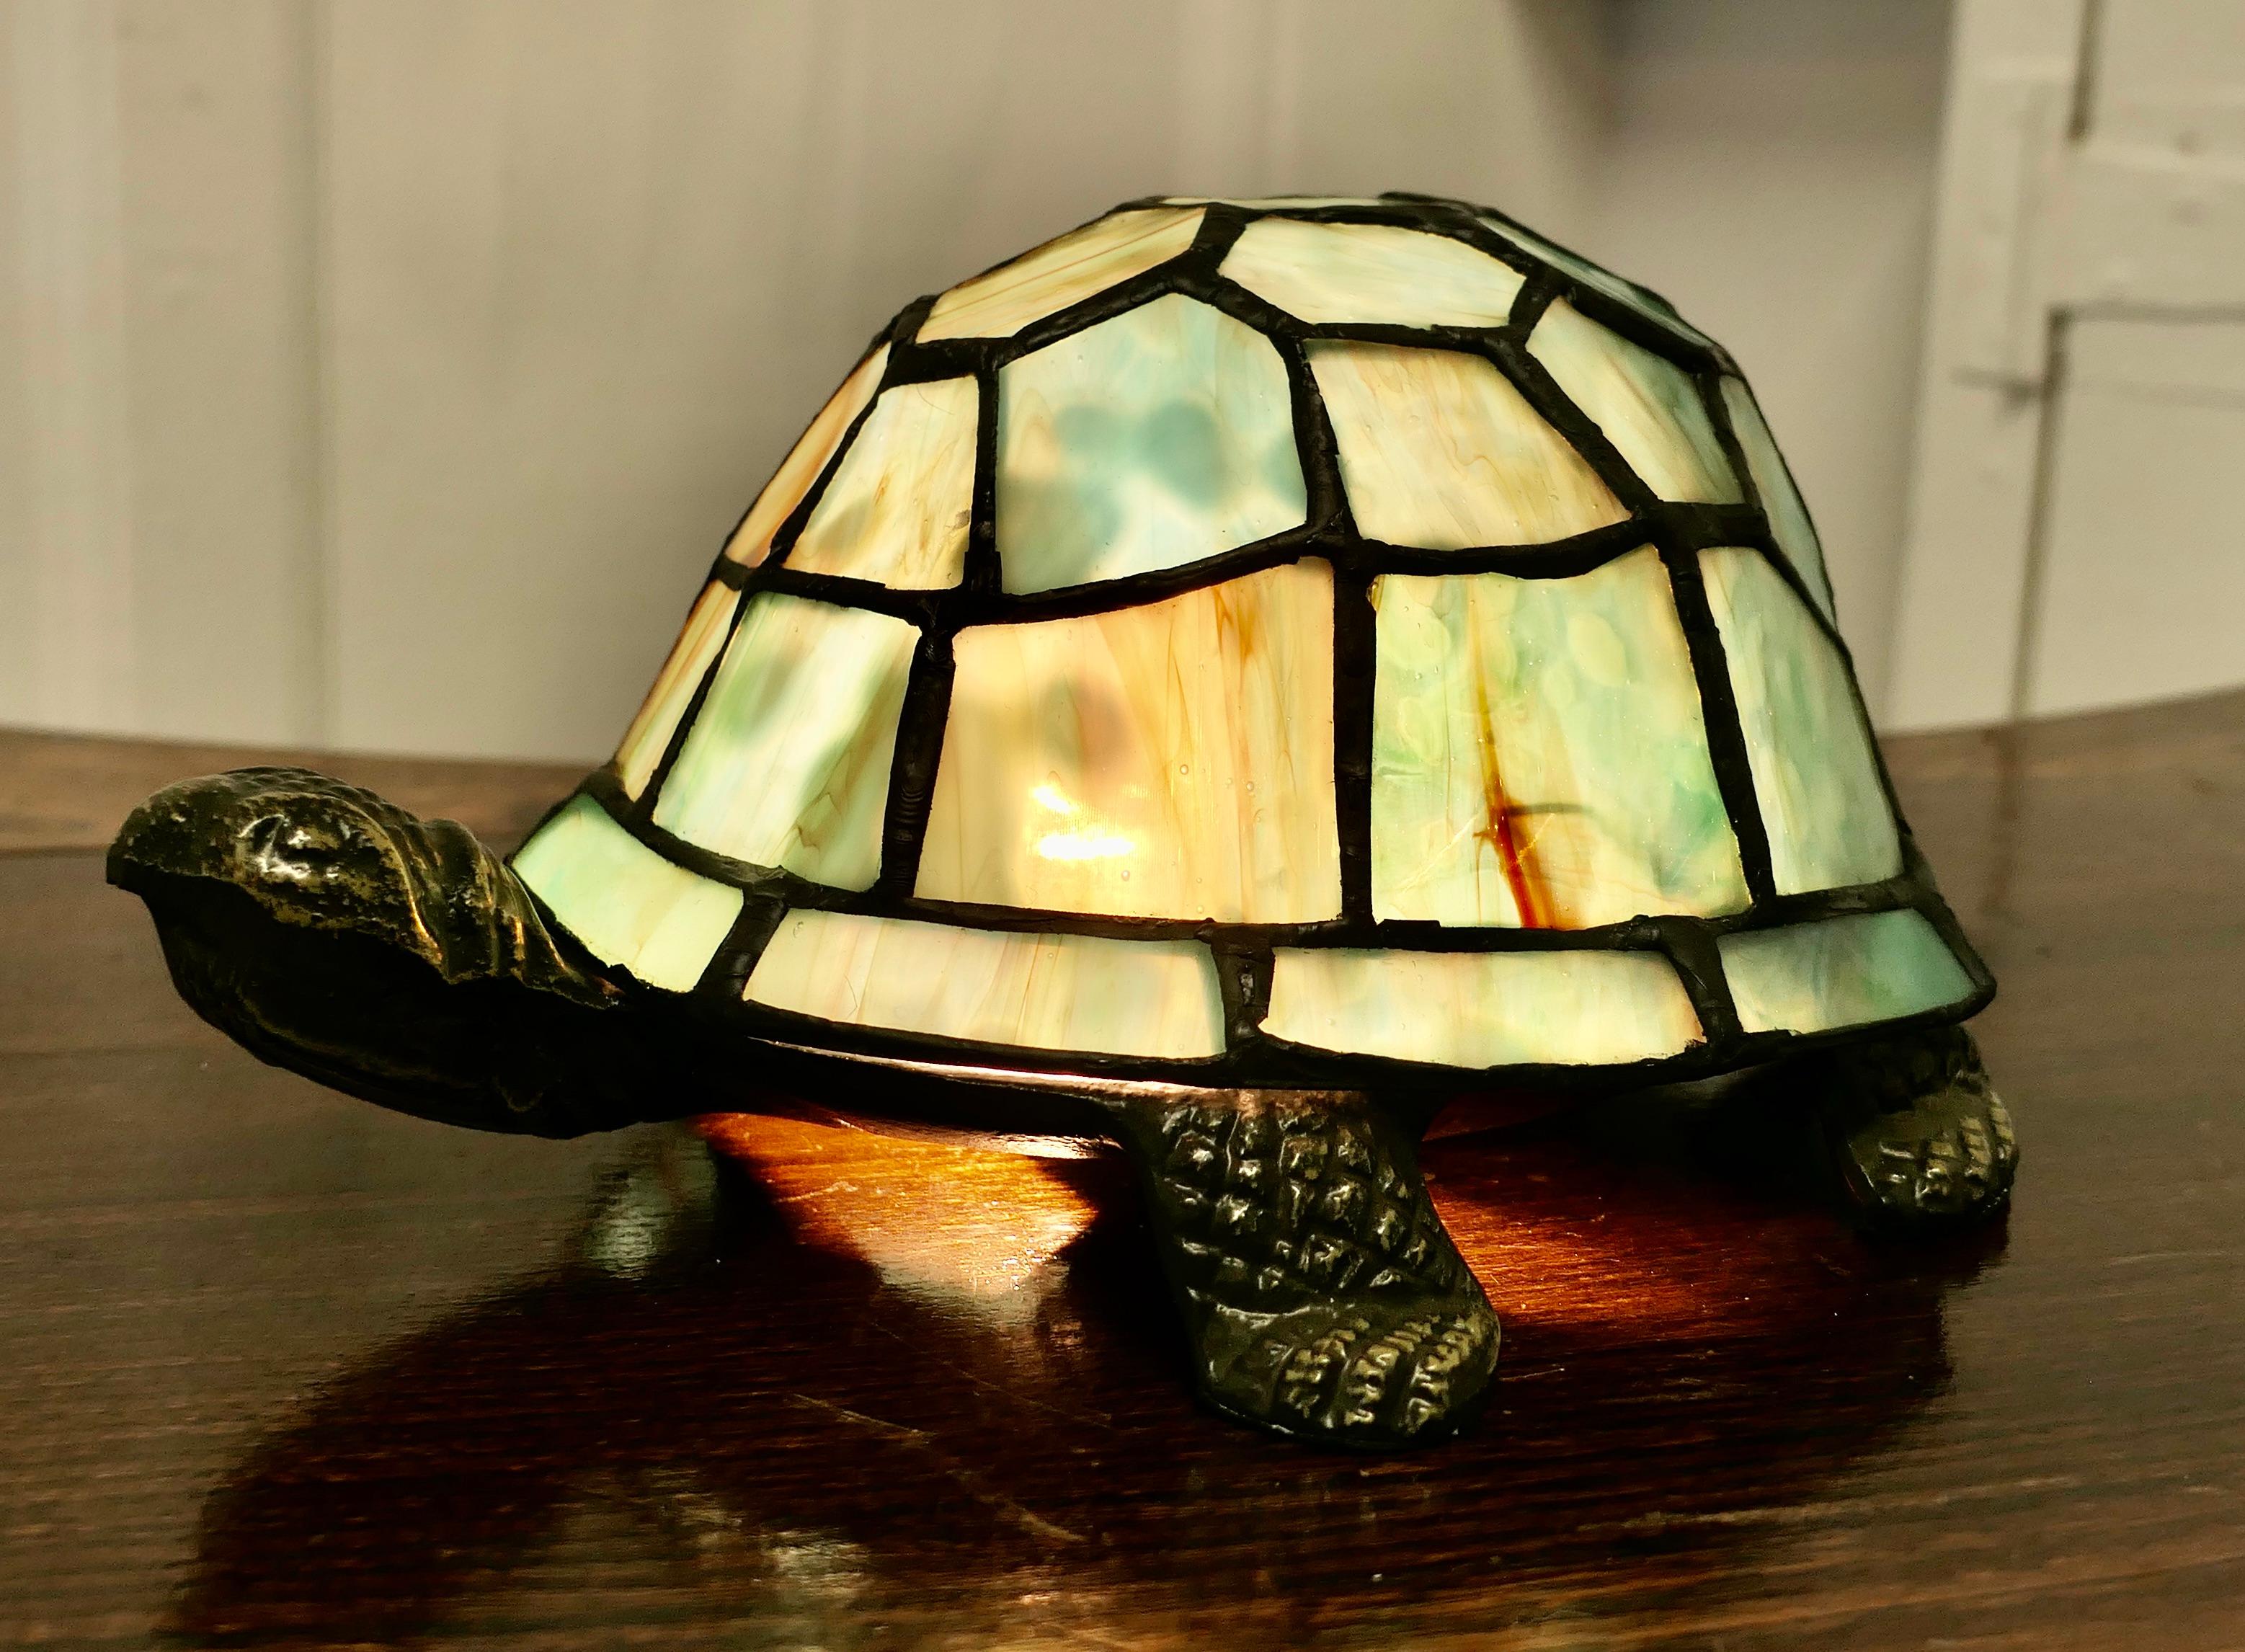 French Glass Tiffany Style Lamp in the form of a Tortoise

This charming lamp has a heavy metal base the shade is made in leaded glass which forms the shell of the tortoise in shades of green and amber
The lamp is in good condition, all working and